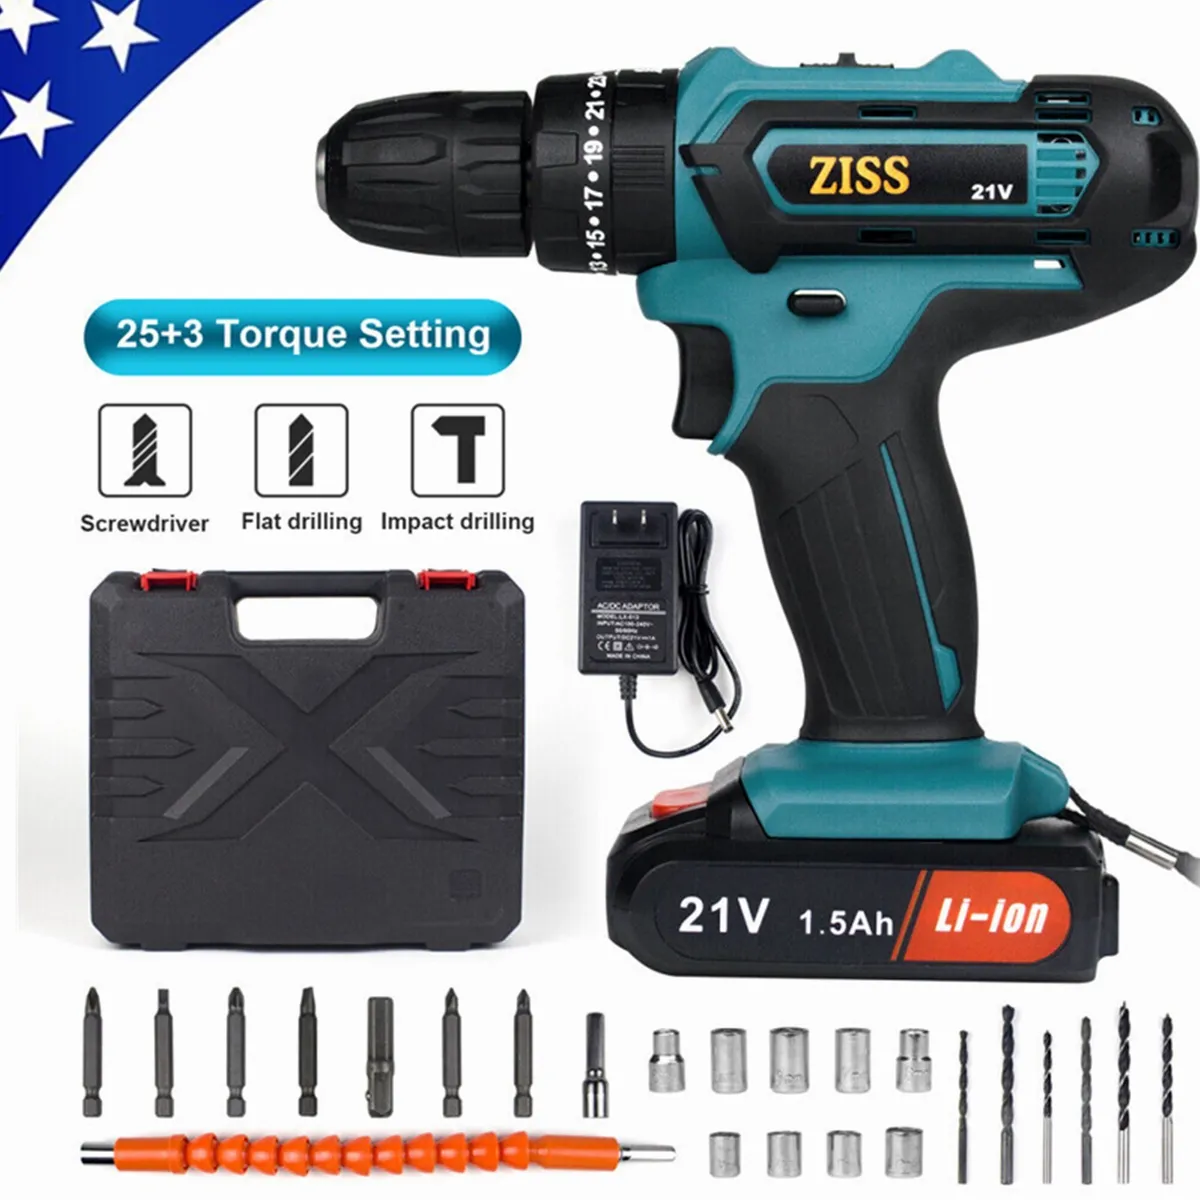 21V Cordless Electric Drill Set 2 -Speed Electrilc Drill/Driver